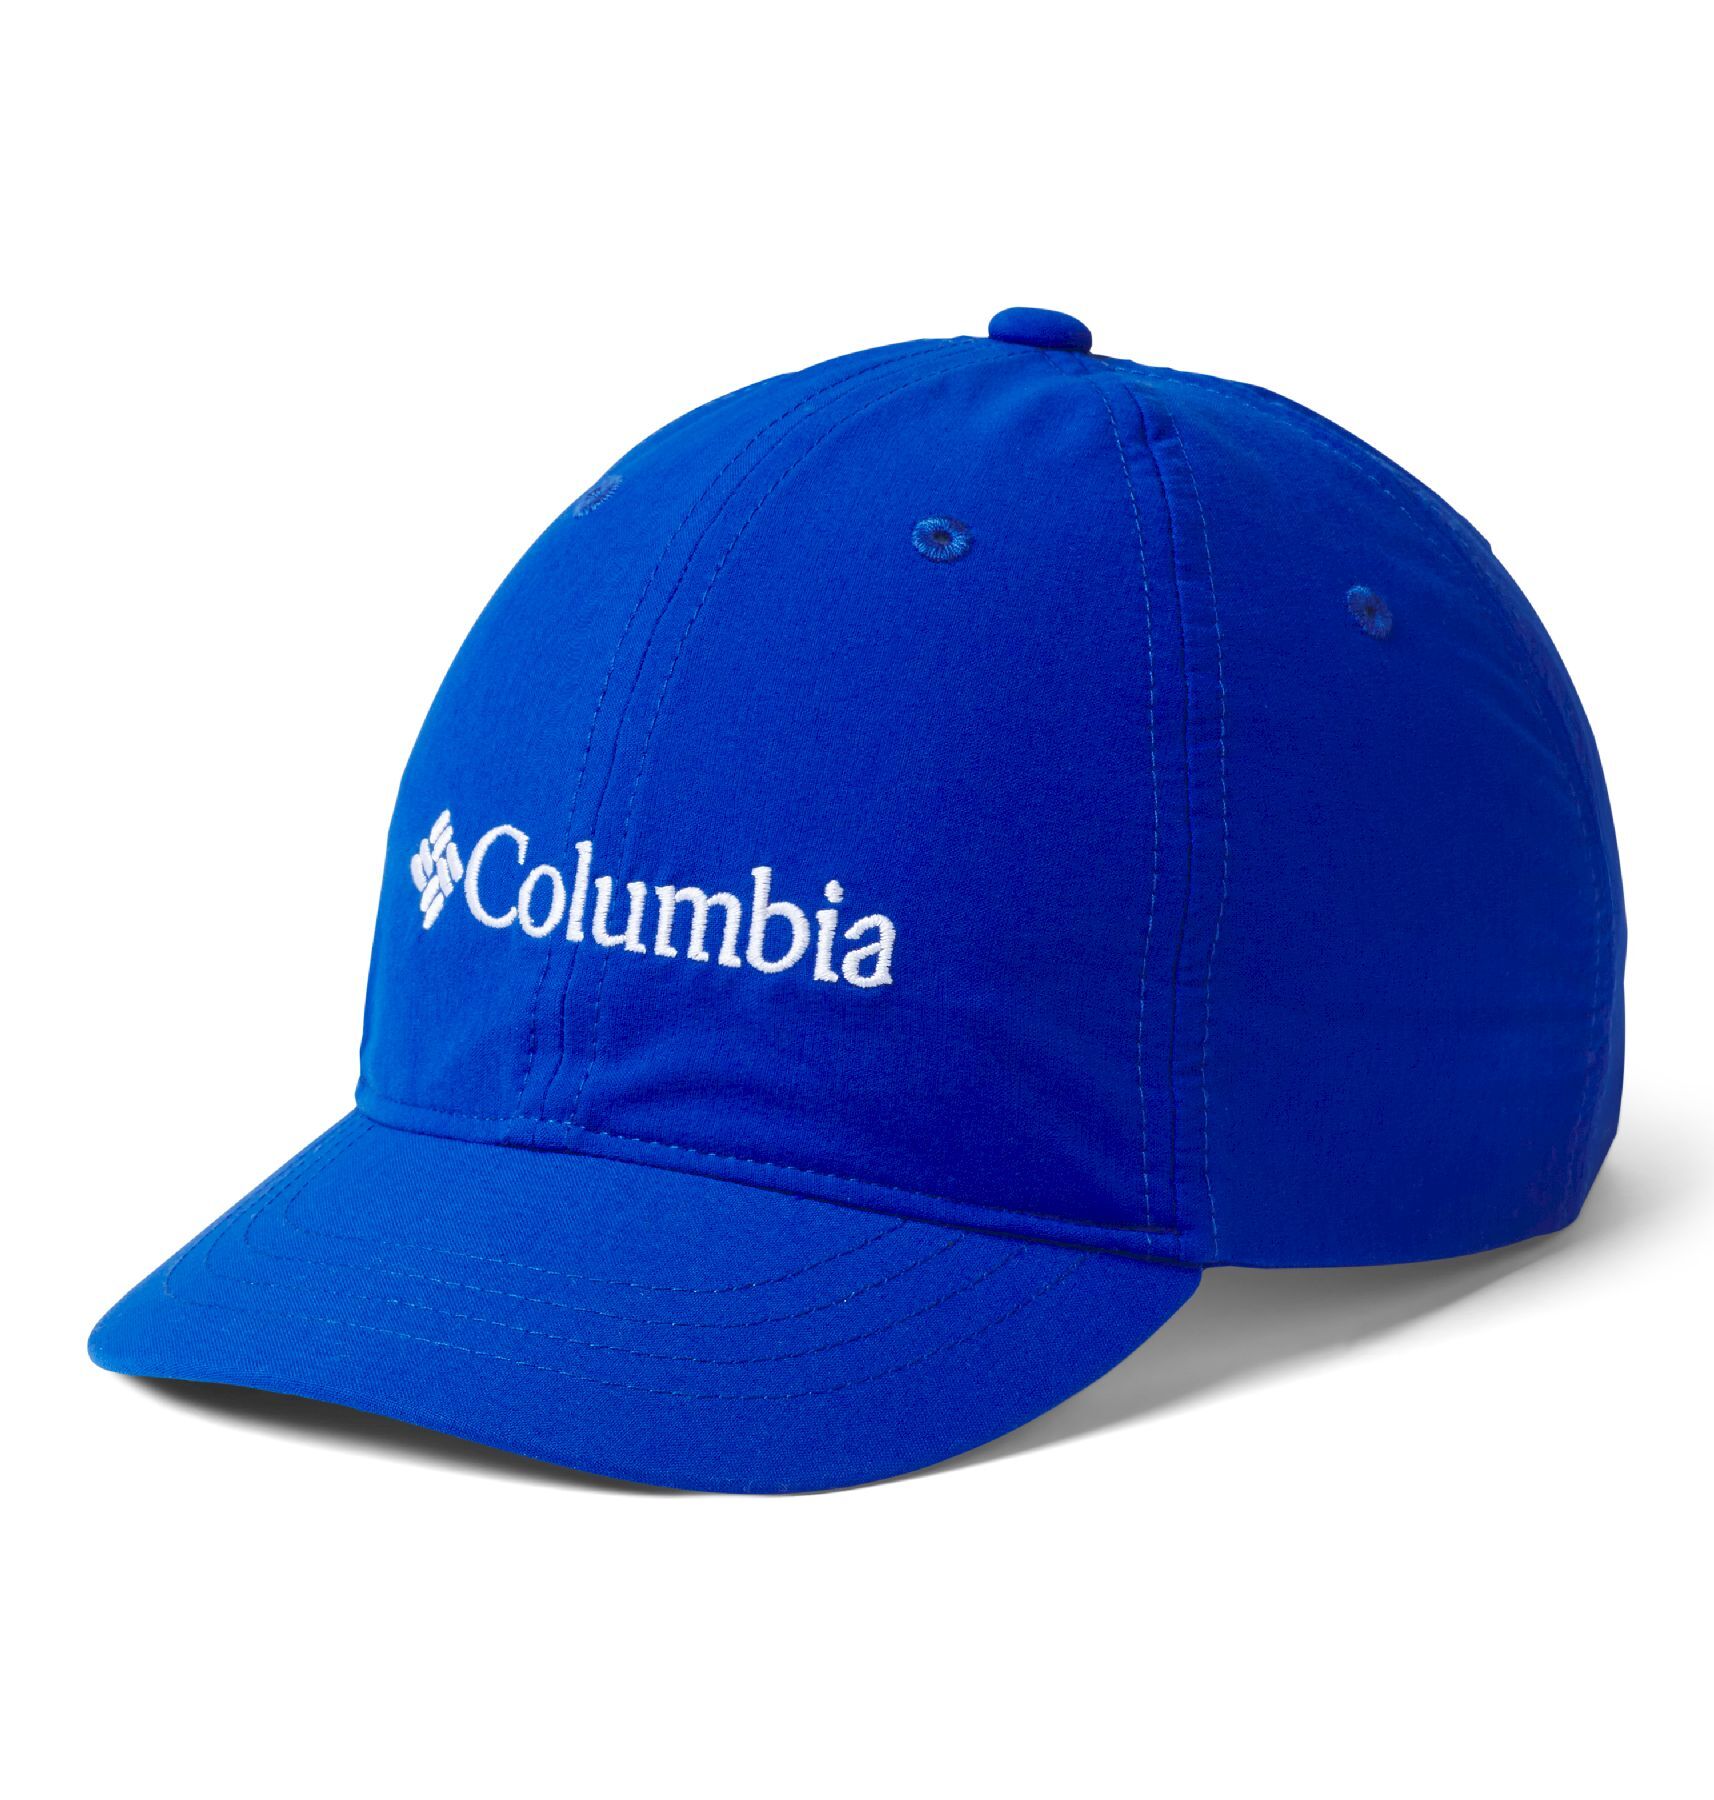 Columbia Youth Adjustable Ball Cap - Casquette enfant | Hardloop